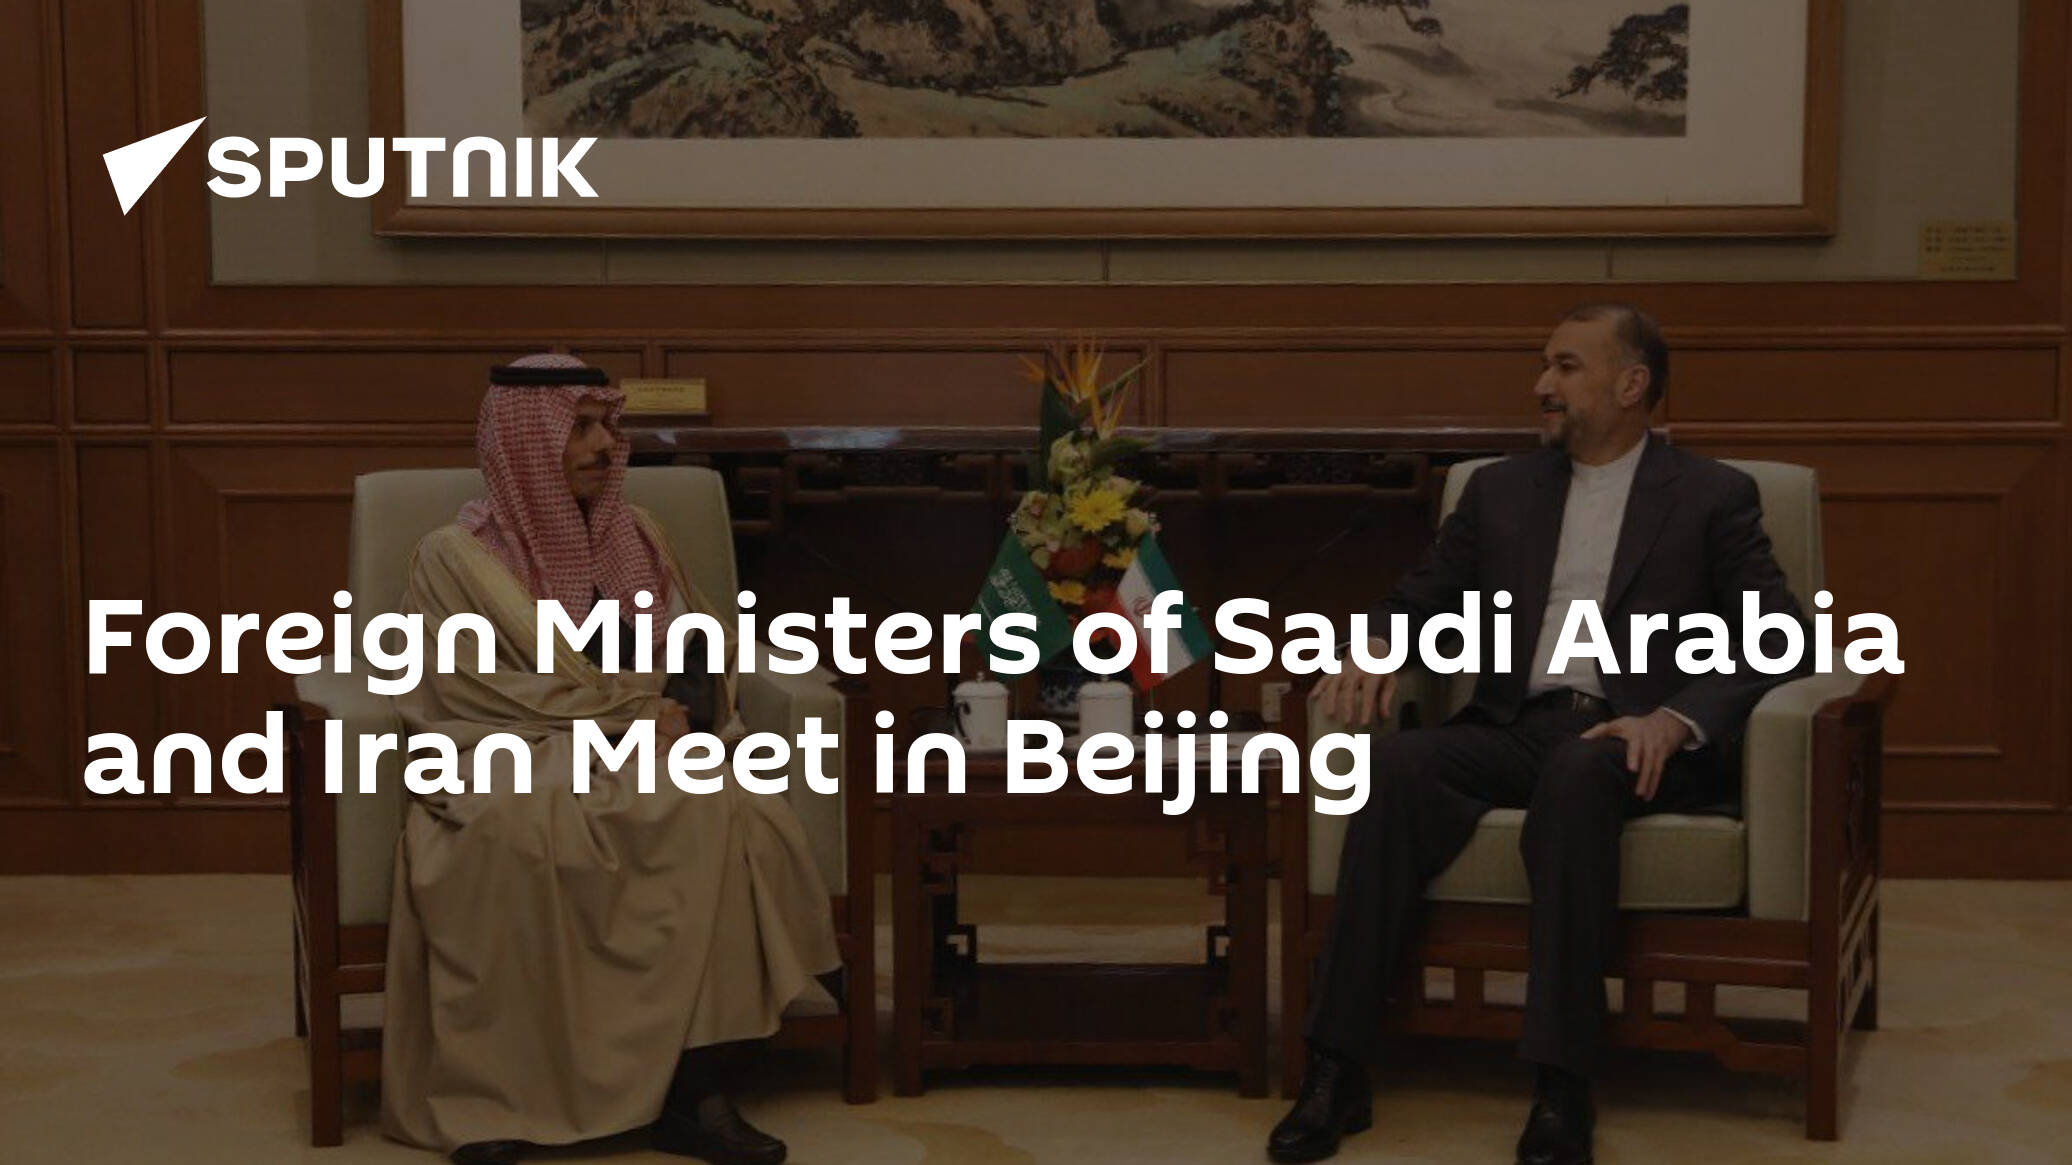 Foreign Ministers of Saudi Arabia and Iran Meet in Beijing